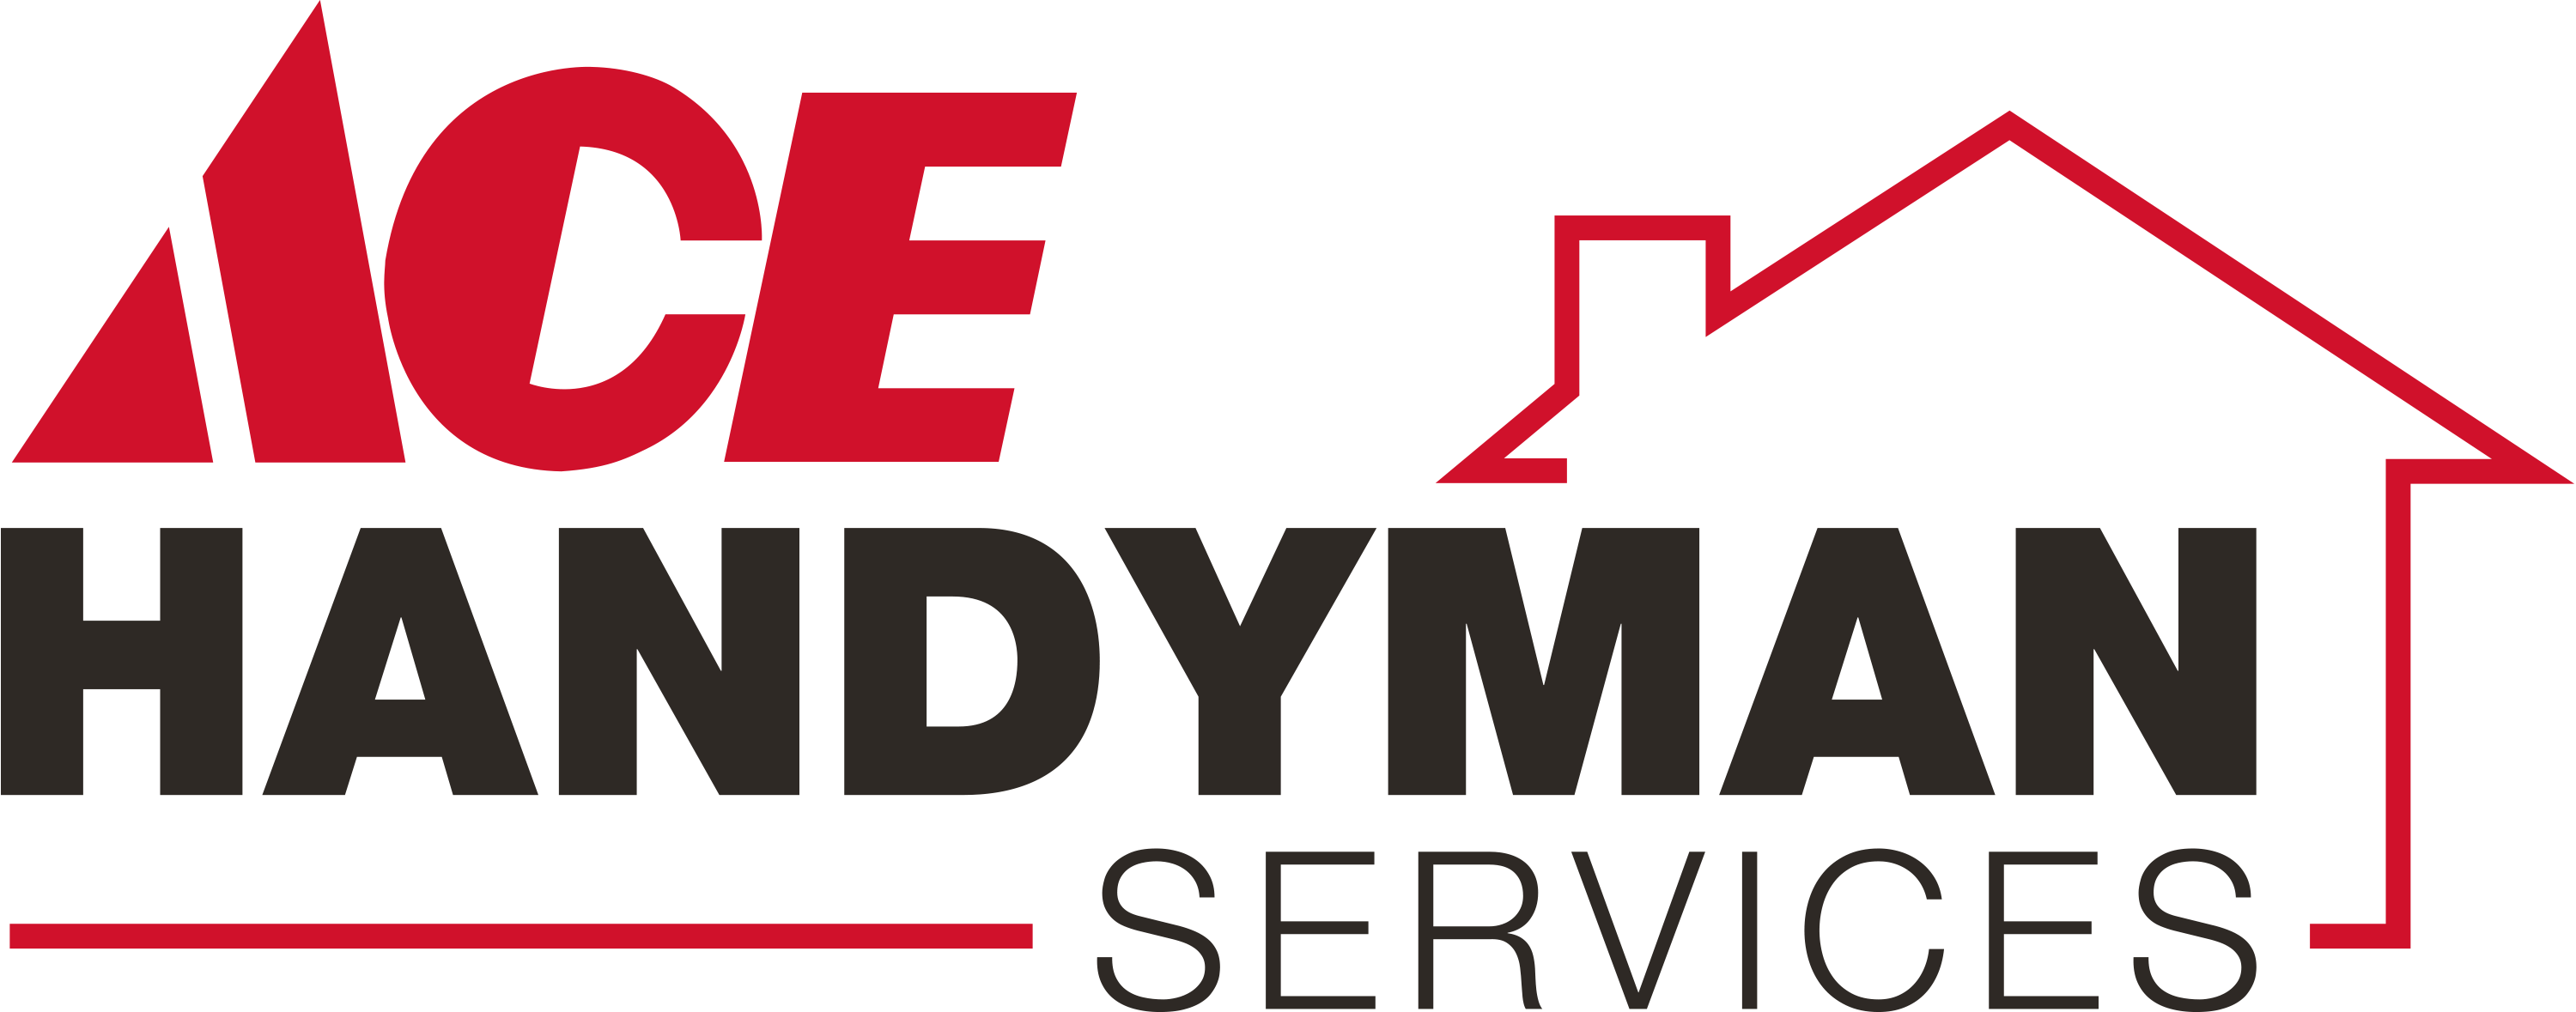 Ace Handyman Services Scottsdale PV-Unlicensed Contractor Logo